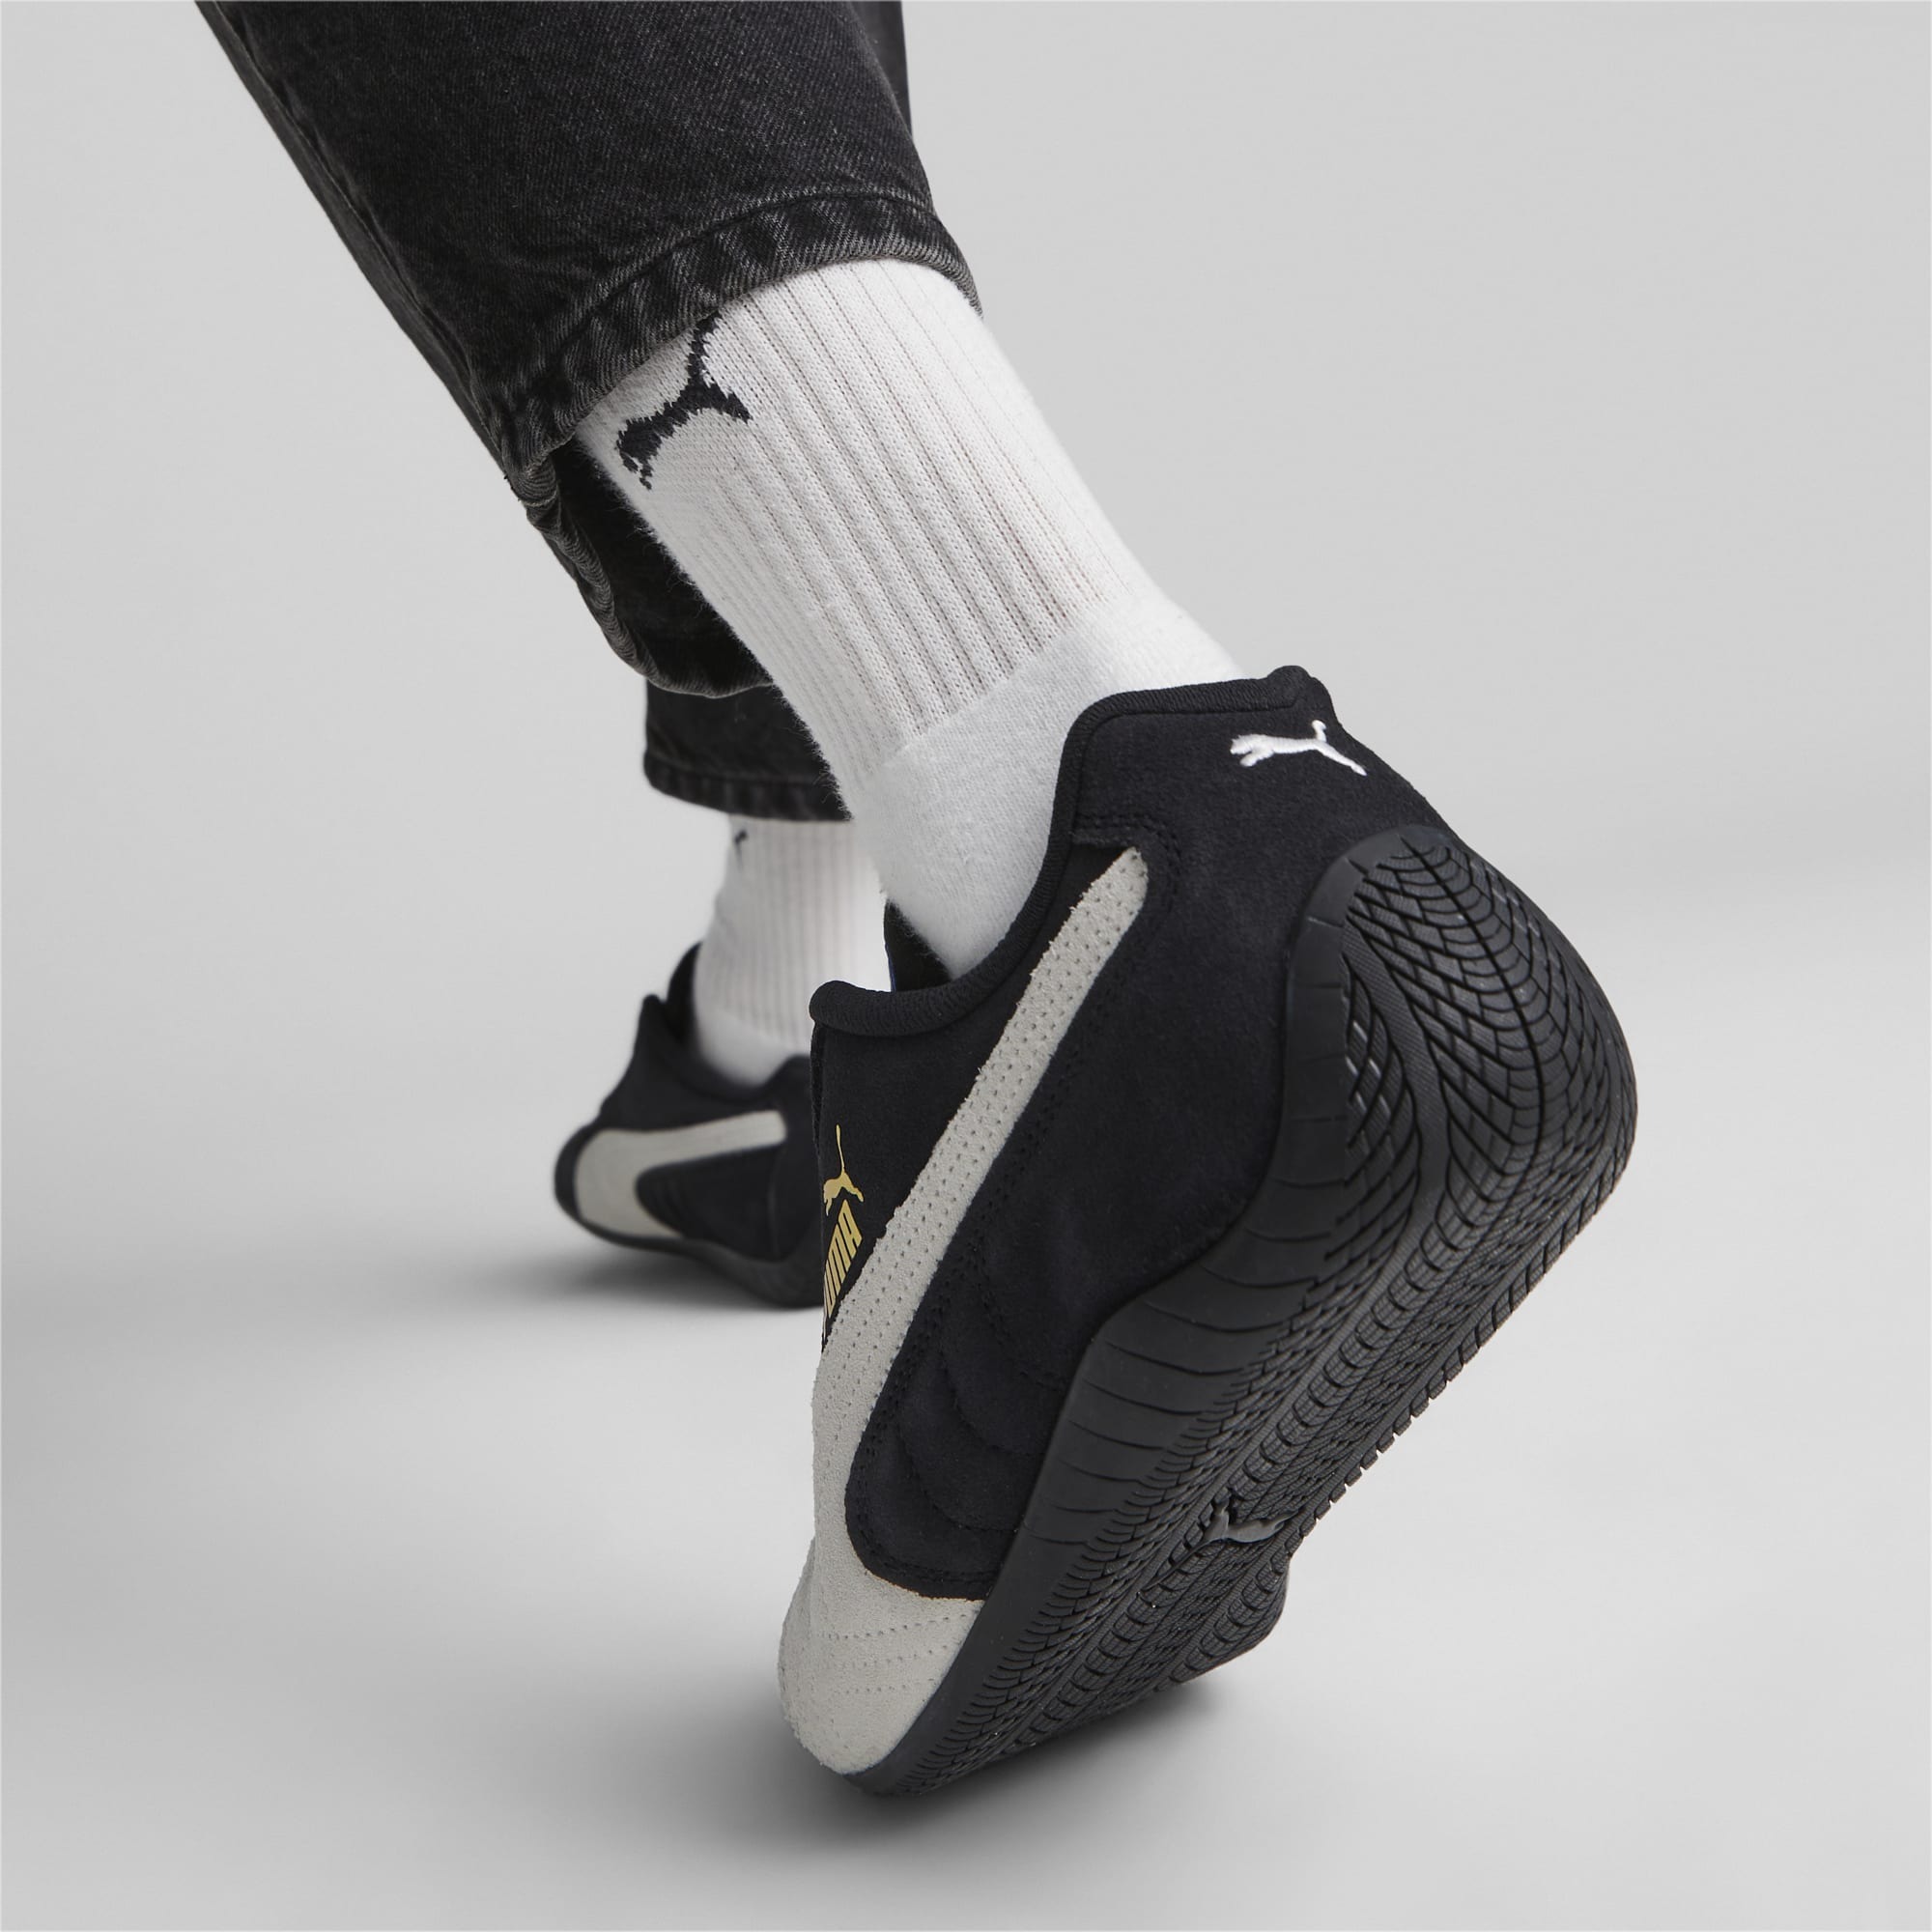 PUMA's Speedcat sneaker in a black and white colorway